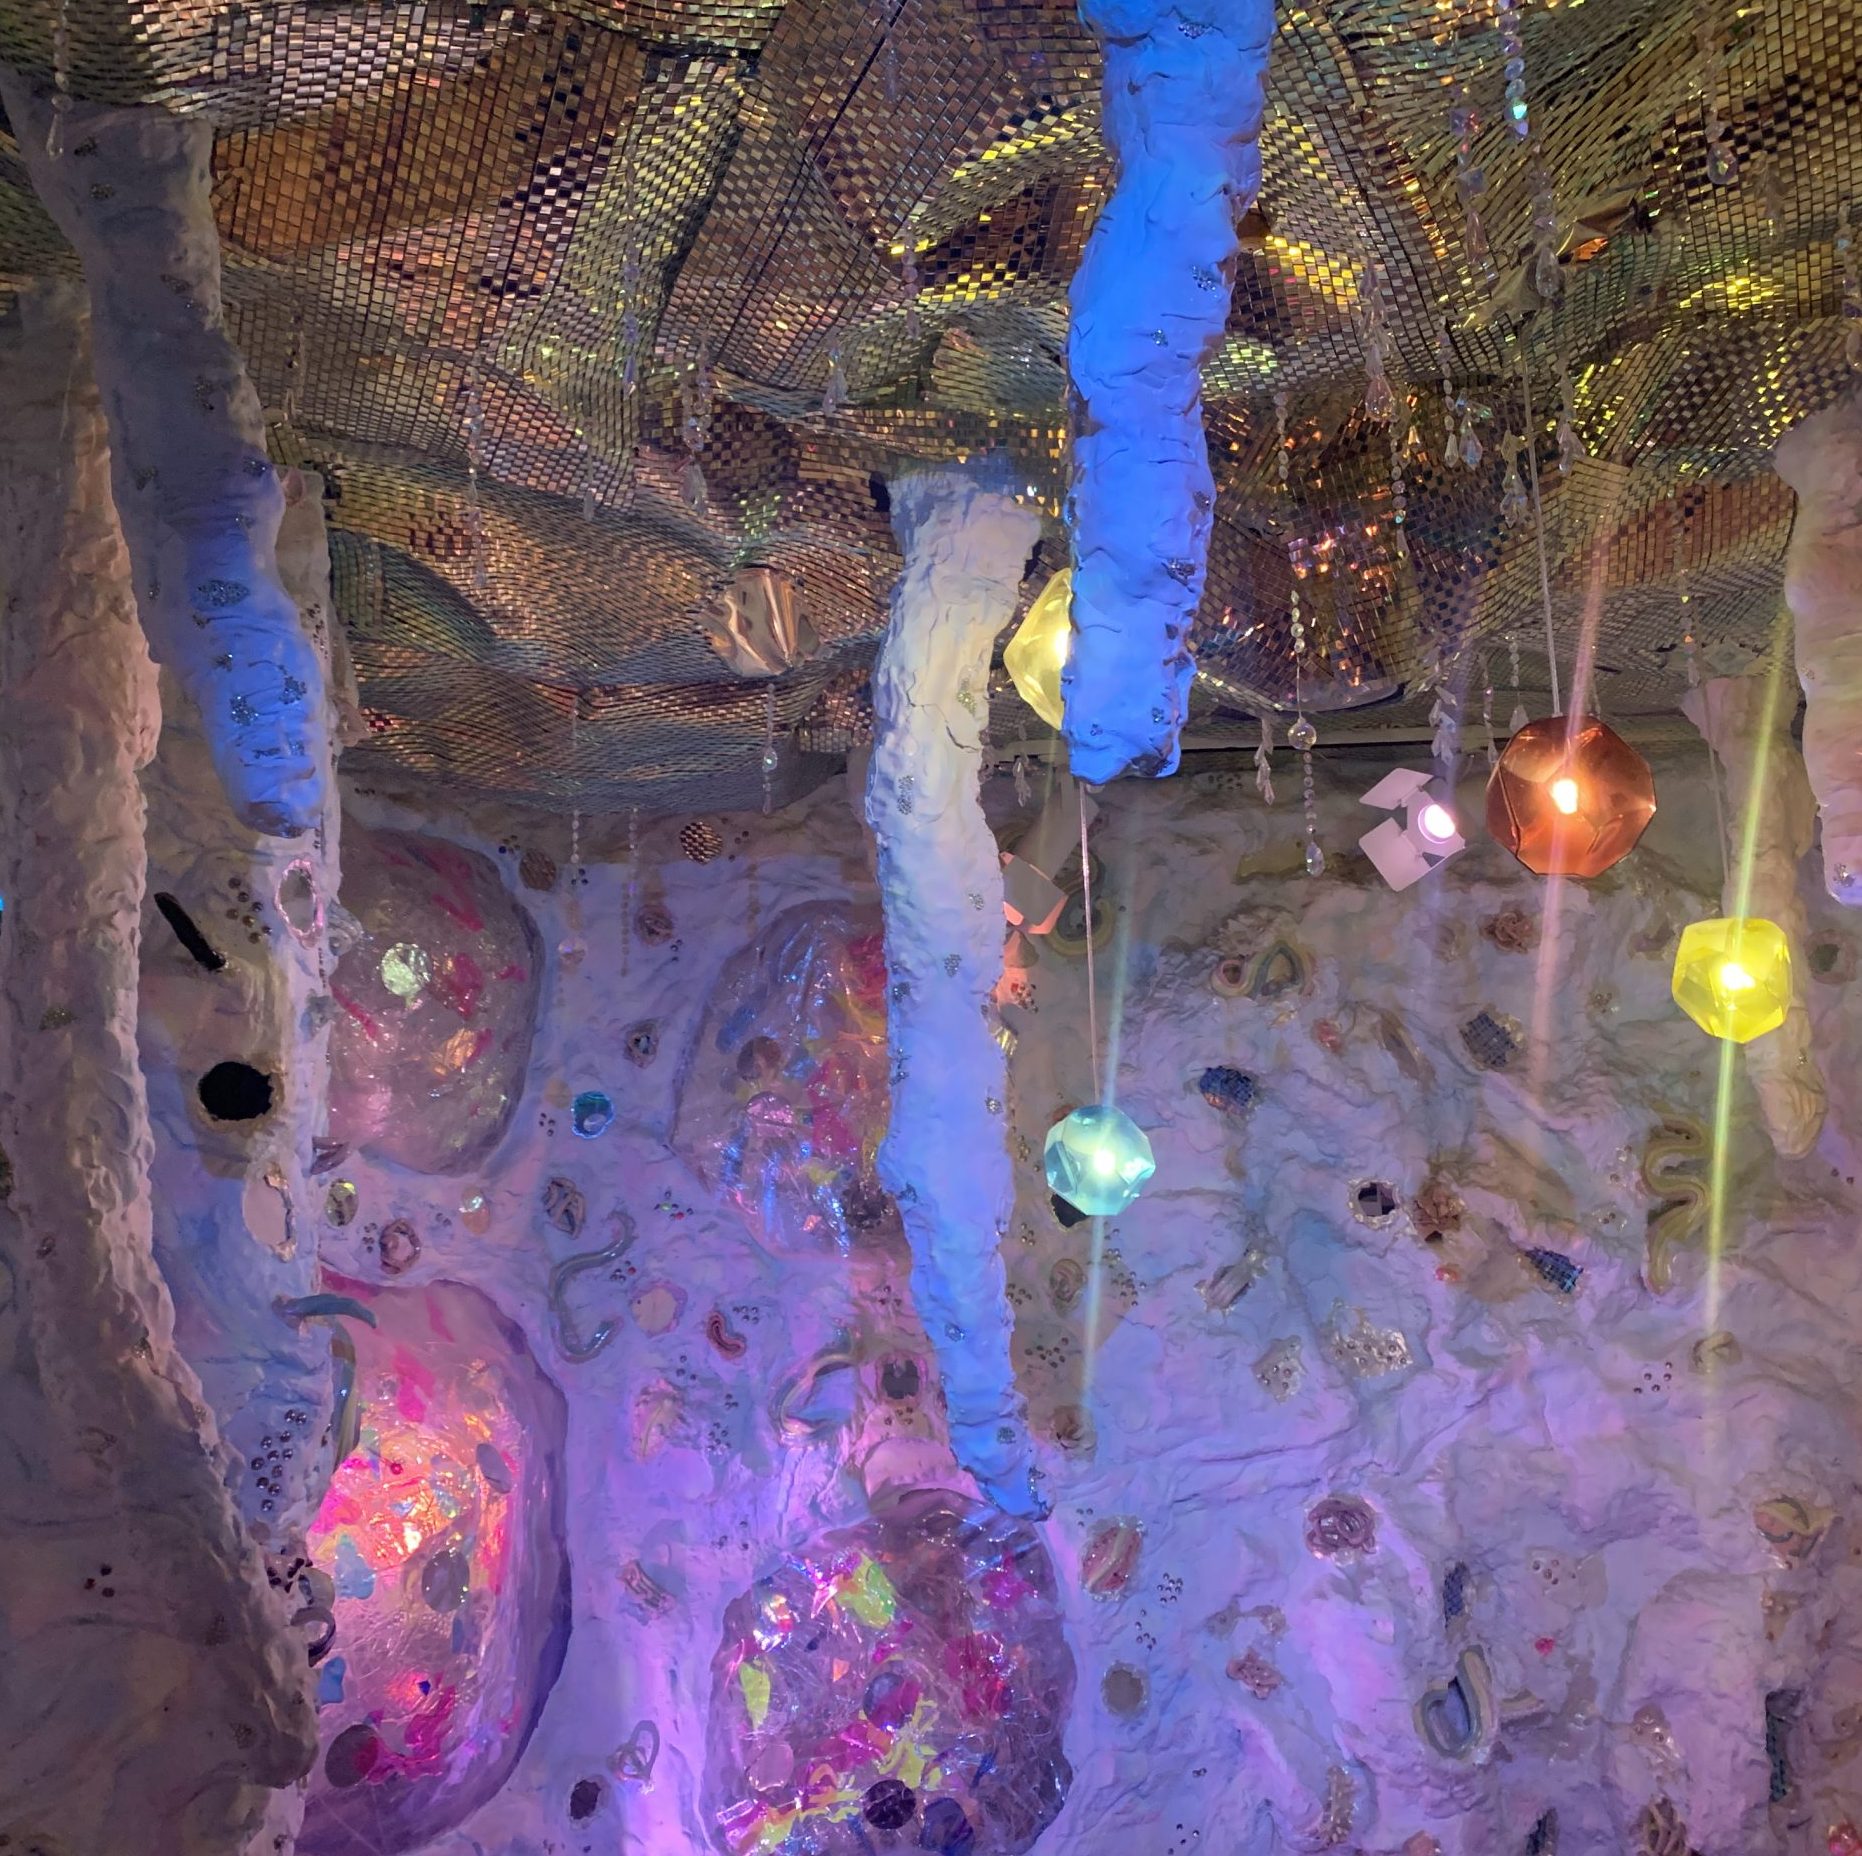 An immersive installation at Meow Wolf that appears like a cave with colorful gemstones